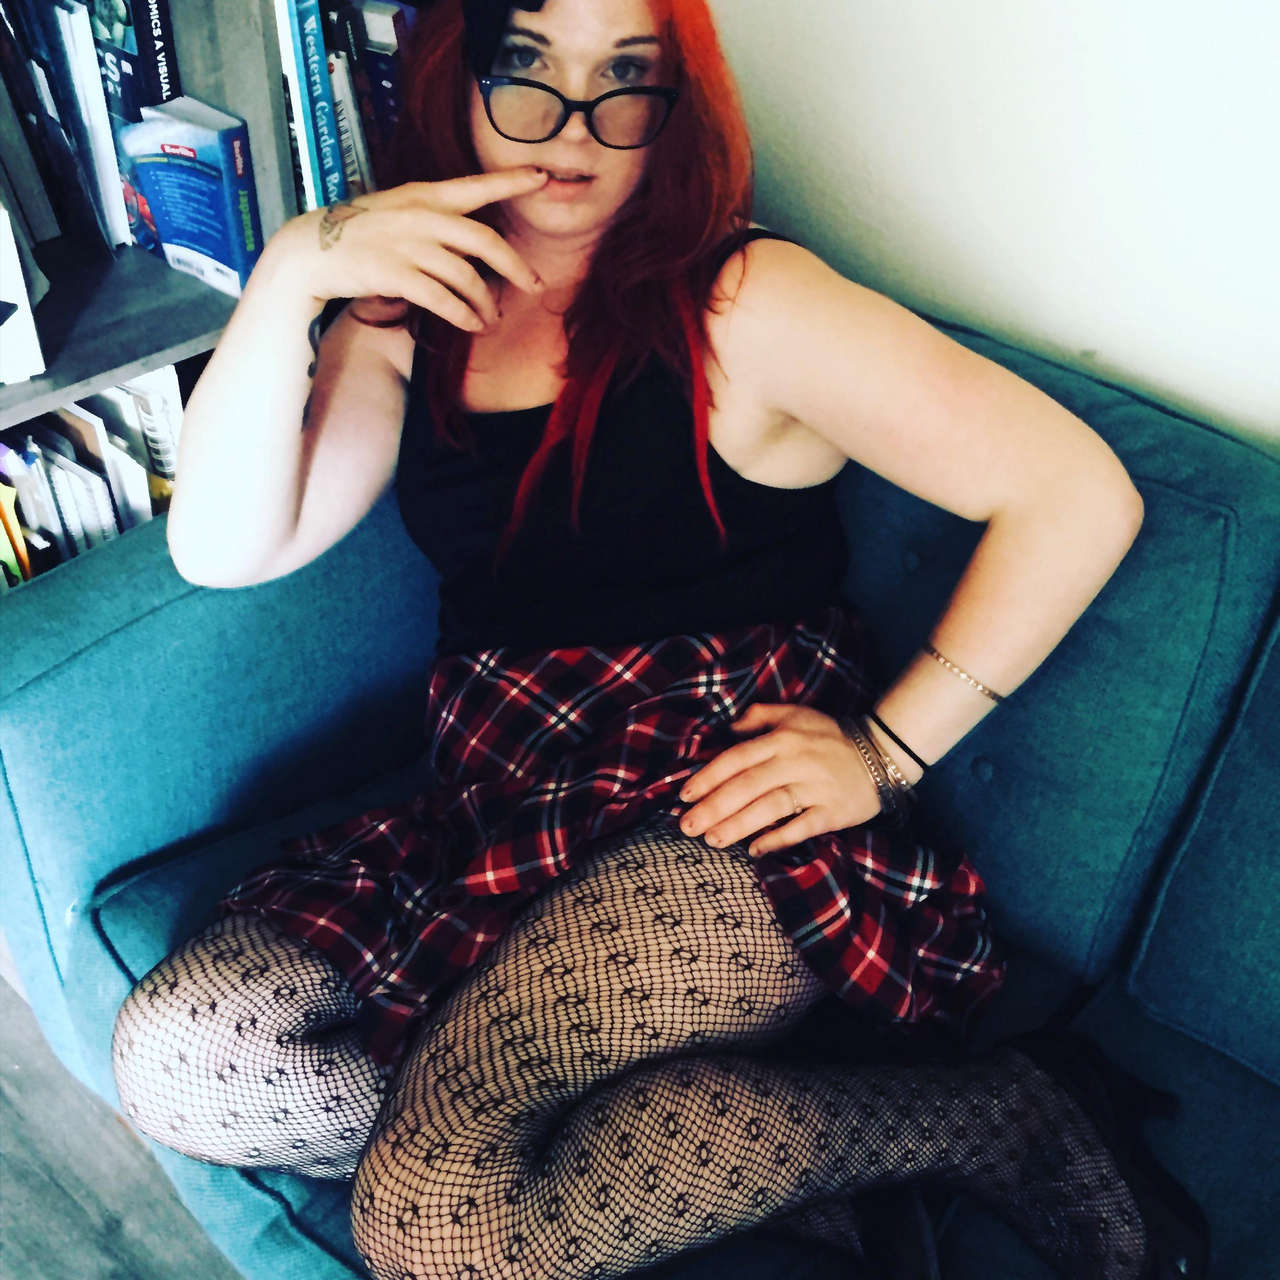 Hey Daddy Young Trans Schoolgirl Ready For Sex E